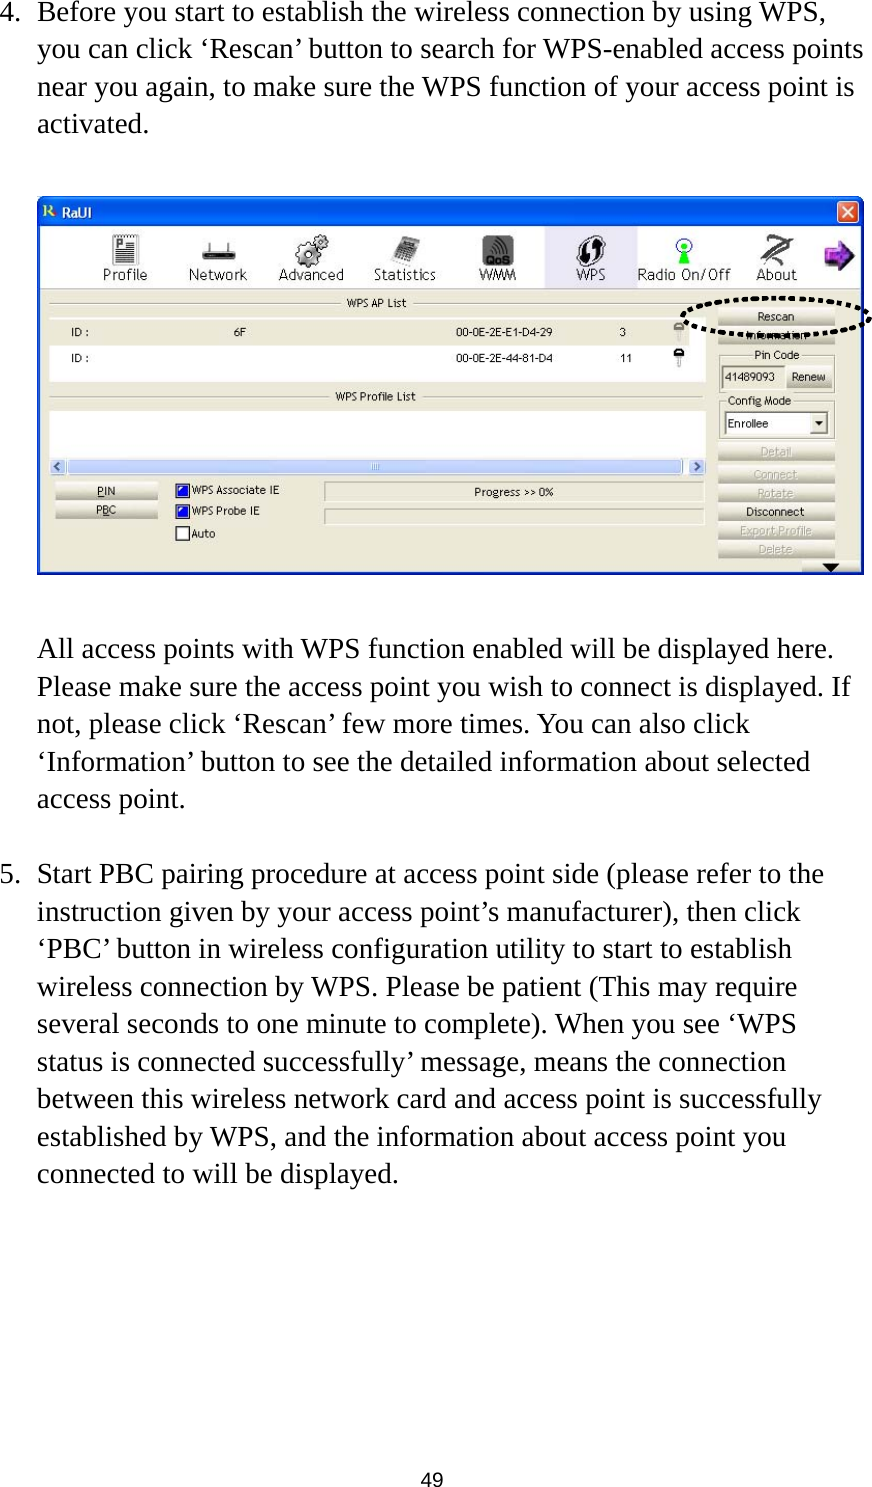  49 4. Before you start to establish the wireless connection by using WPS, you can click ‘Rescan’ button to search for WPS-enabled access points near you again, to make sure the WPS function of your access point is activated.    All access points with WPS function enabled will be displayed here. Please make sure the access point you wish to connect is displayed. If not, please click ‘Rescan’ few more times. You can also click ‘Information’ button to see the detailed information about selected access point.  5. Start PBC pairing procedure at access point side (please refer to the instruction given by your access point’s manufacturer), then click ‘PBC’ button in wireless configuration utility to start to establish wireless connection by WPS. Please be patient (This may require several seconds to one minute to complete). When you see ‘WPS status is connected successfully’ message, means the connection between this wireless network card and access point is successfully established by WPS, and the information about access point you connected to will be displayed.       